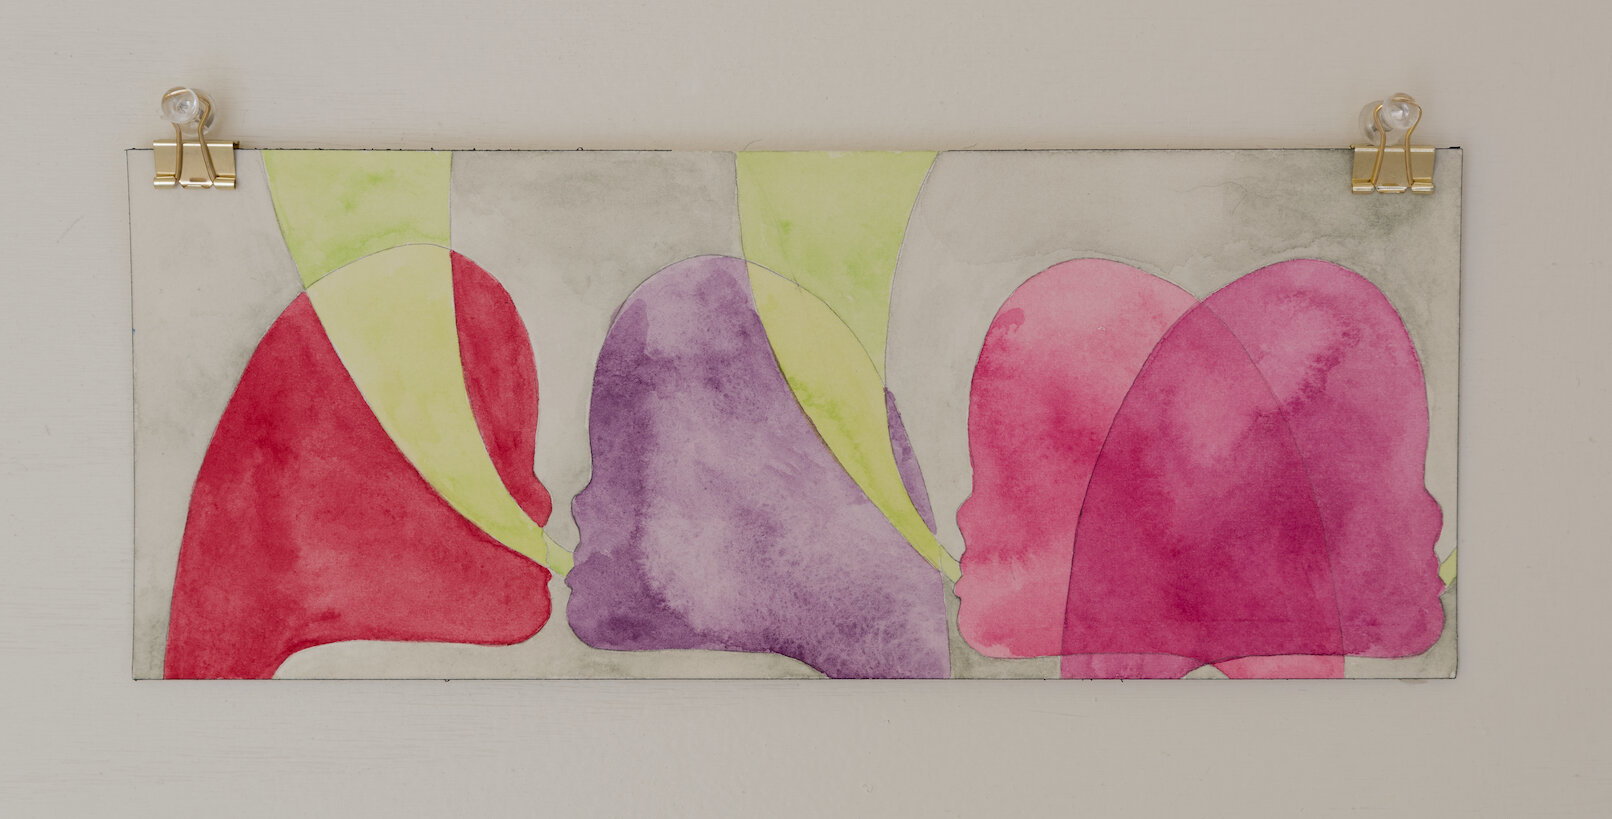  Cliff Hengst,  Untitled,  2​020, watercolor on paper, 4 x 10 inches 